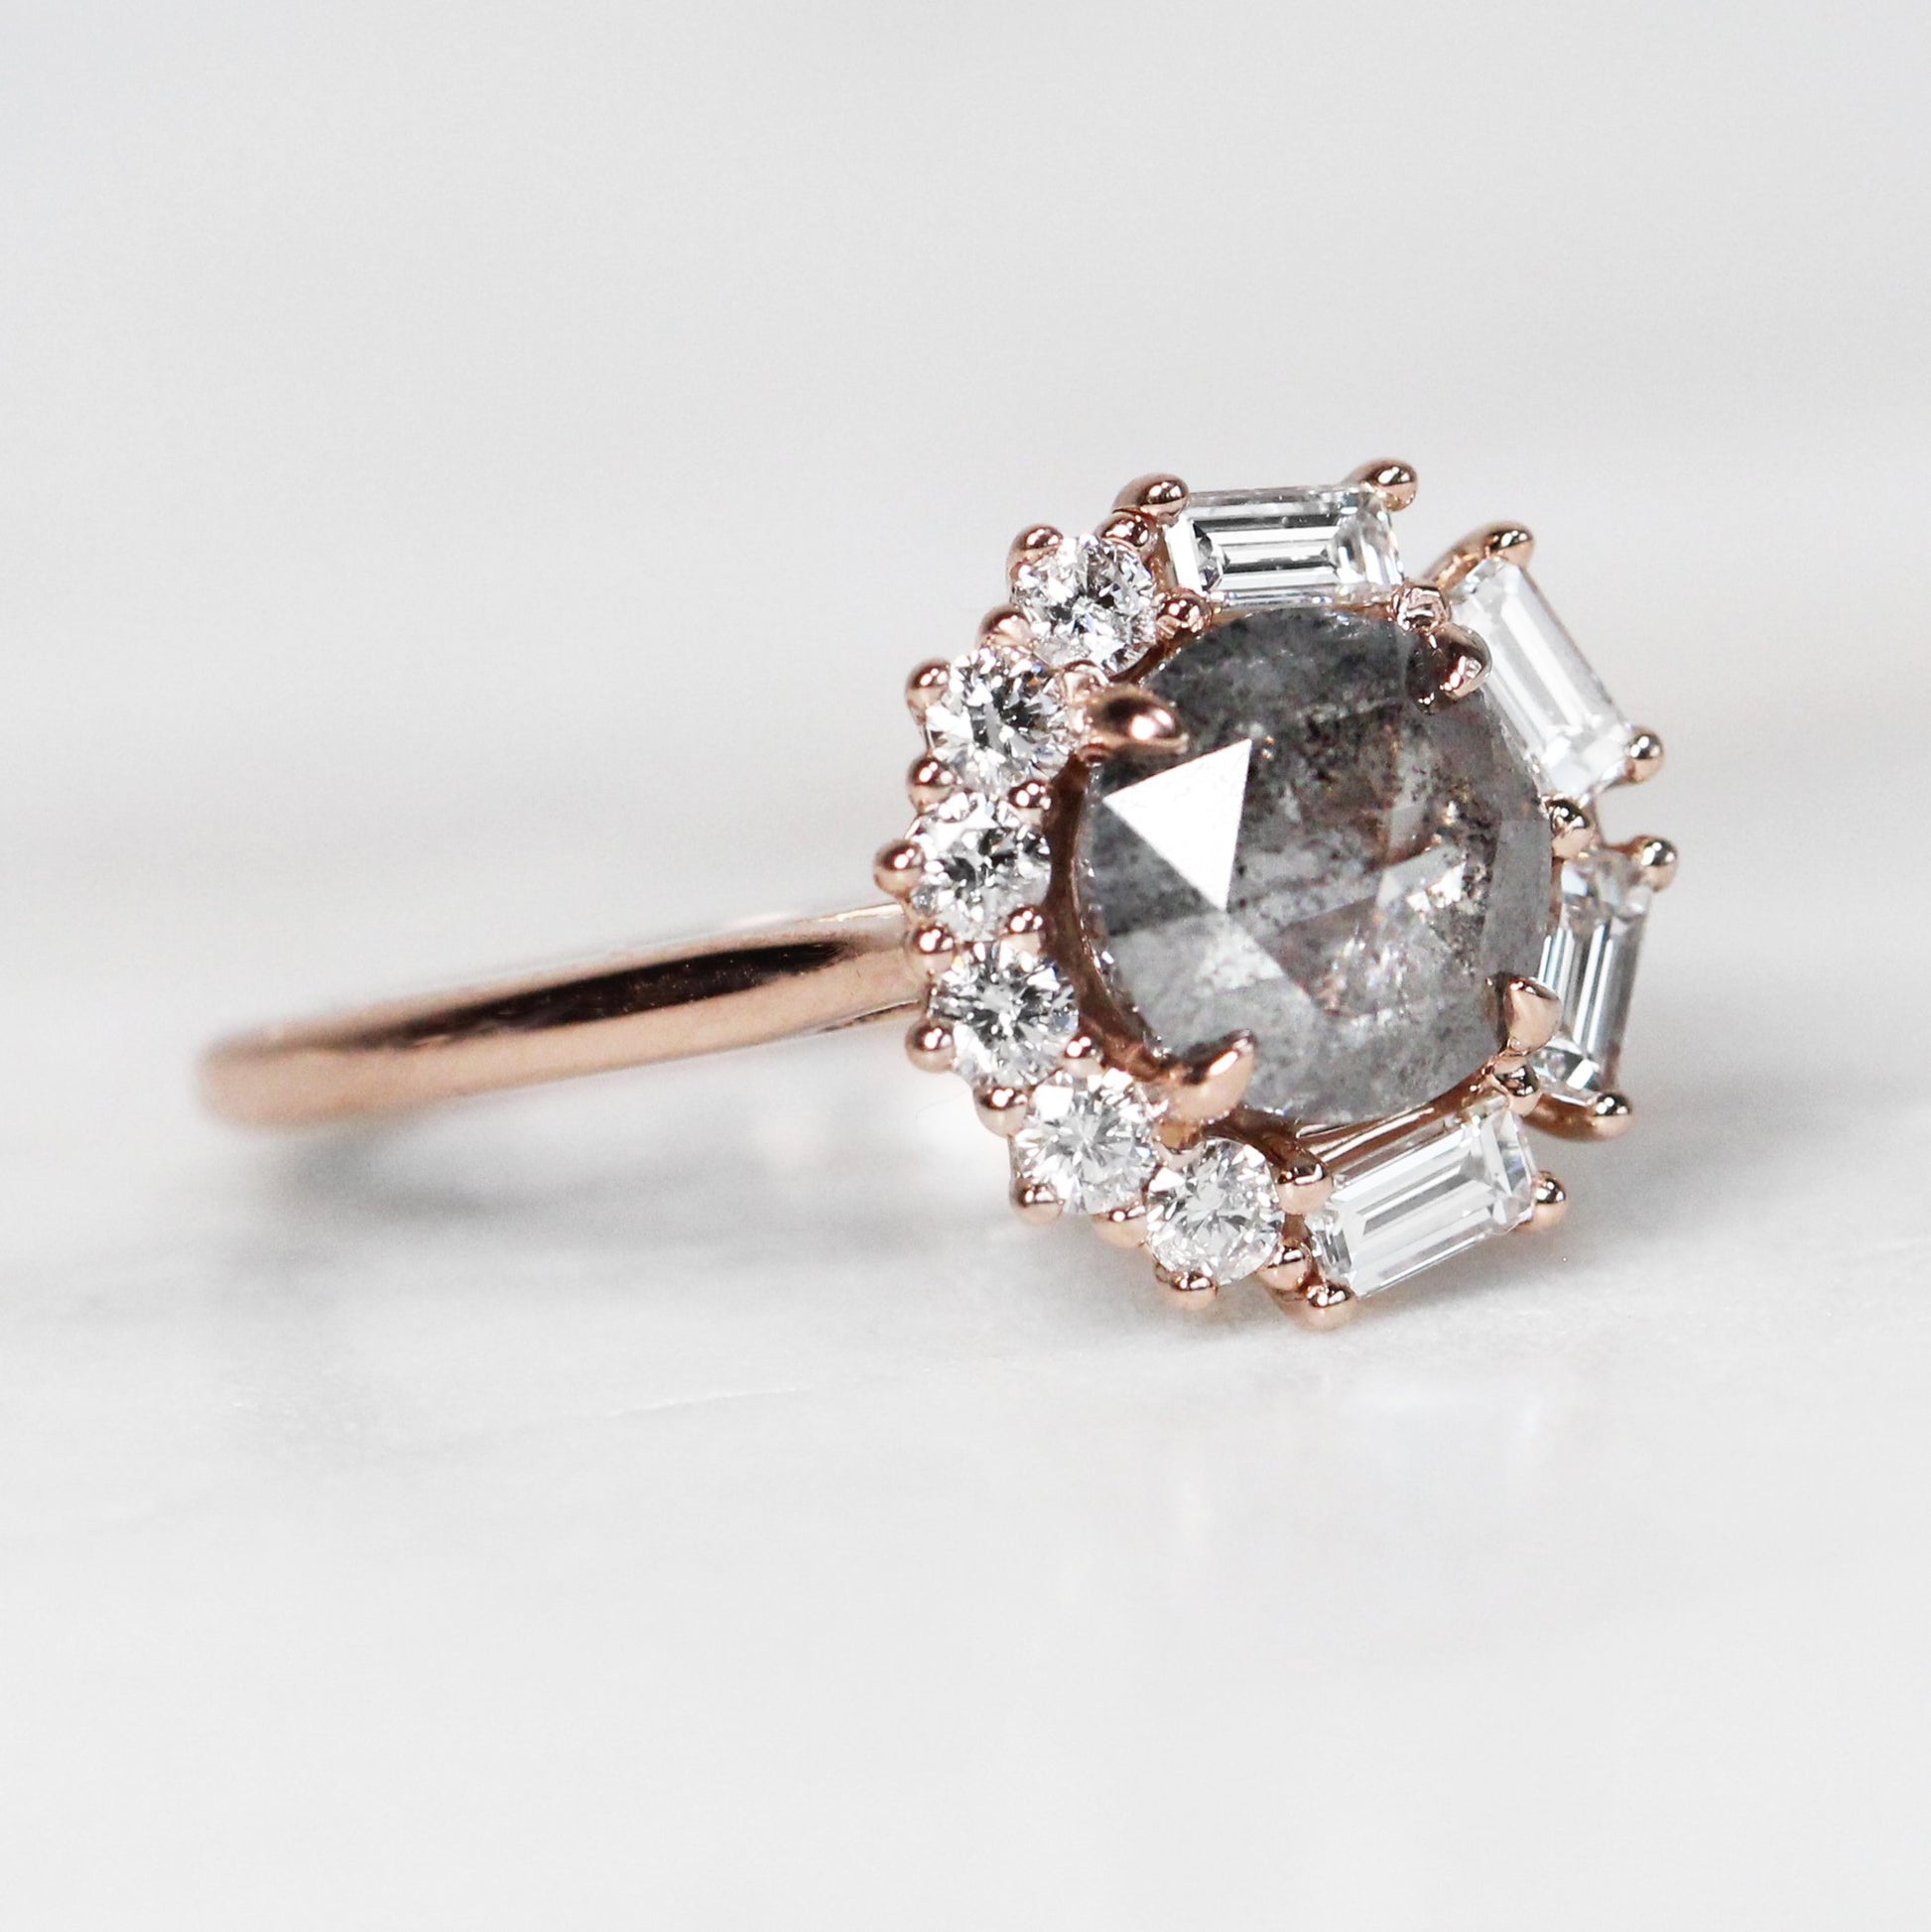 Collins Setting - Midwinter Co. Alternative Bridal Rings and Modern Fine Jewelry